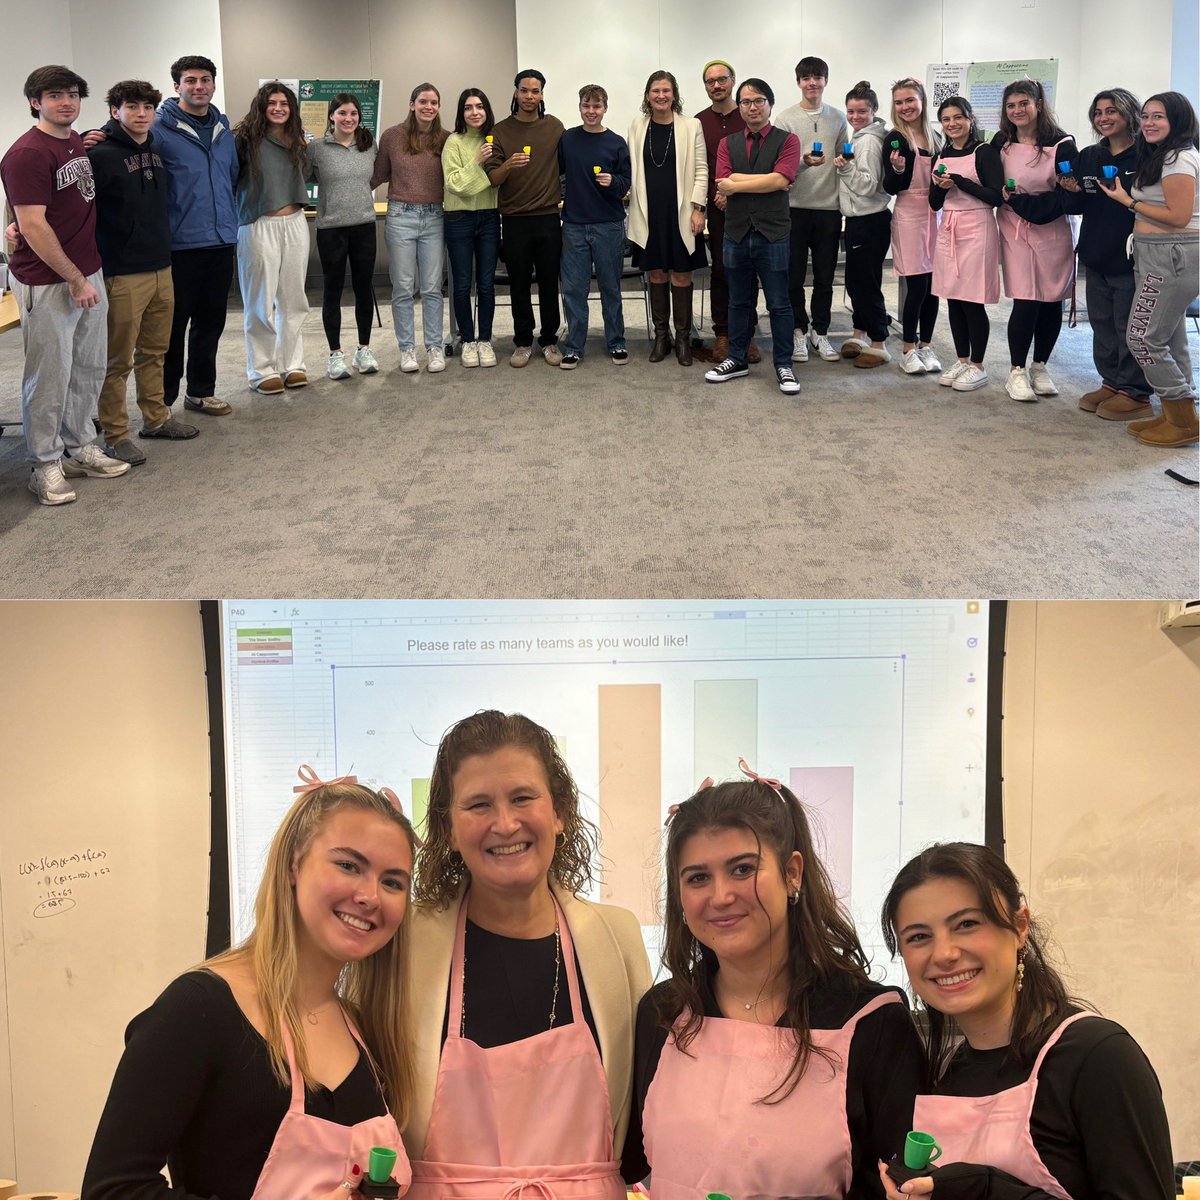 Congratulations to awesome @LAF_Engineering Professor @neobhm + our amazing @LafCol students on their coffee competition! One of my favorite events of the year! You all inspire!